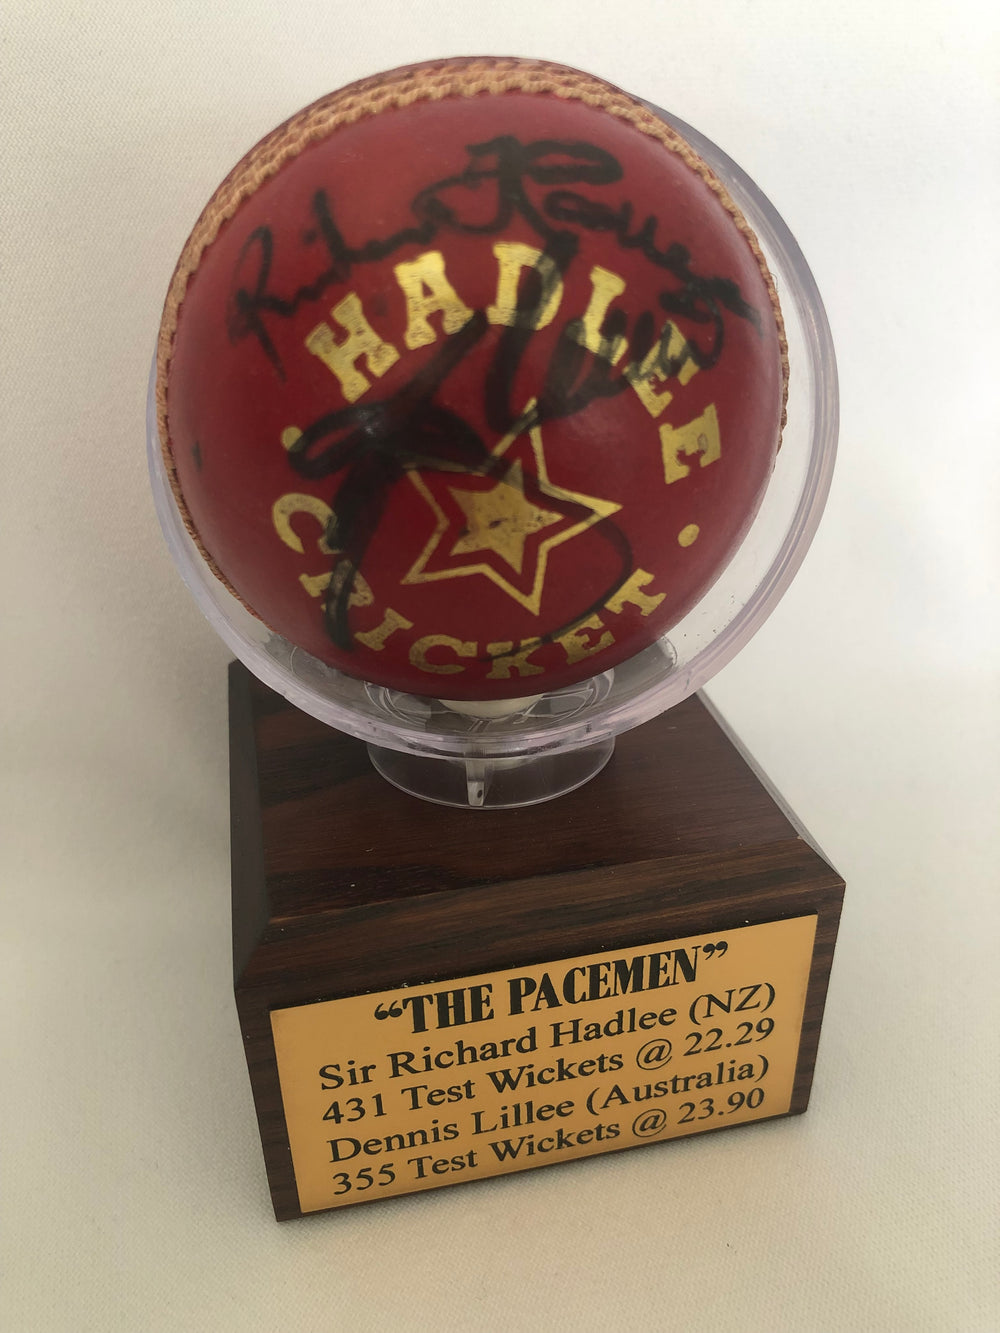 Mounted 'Trophy' cricket ball "The Pacemen"